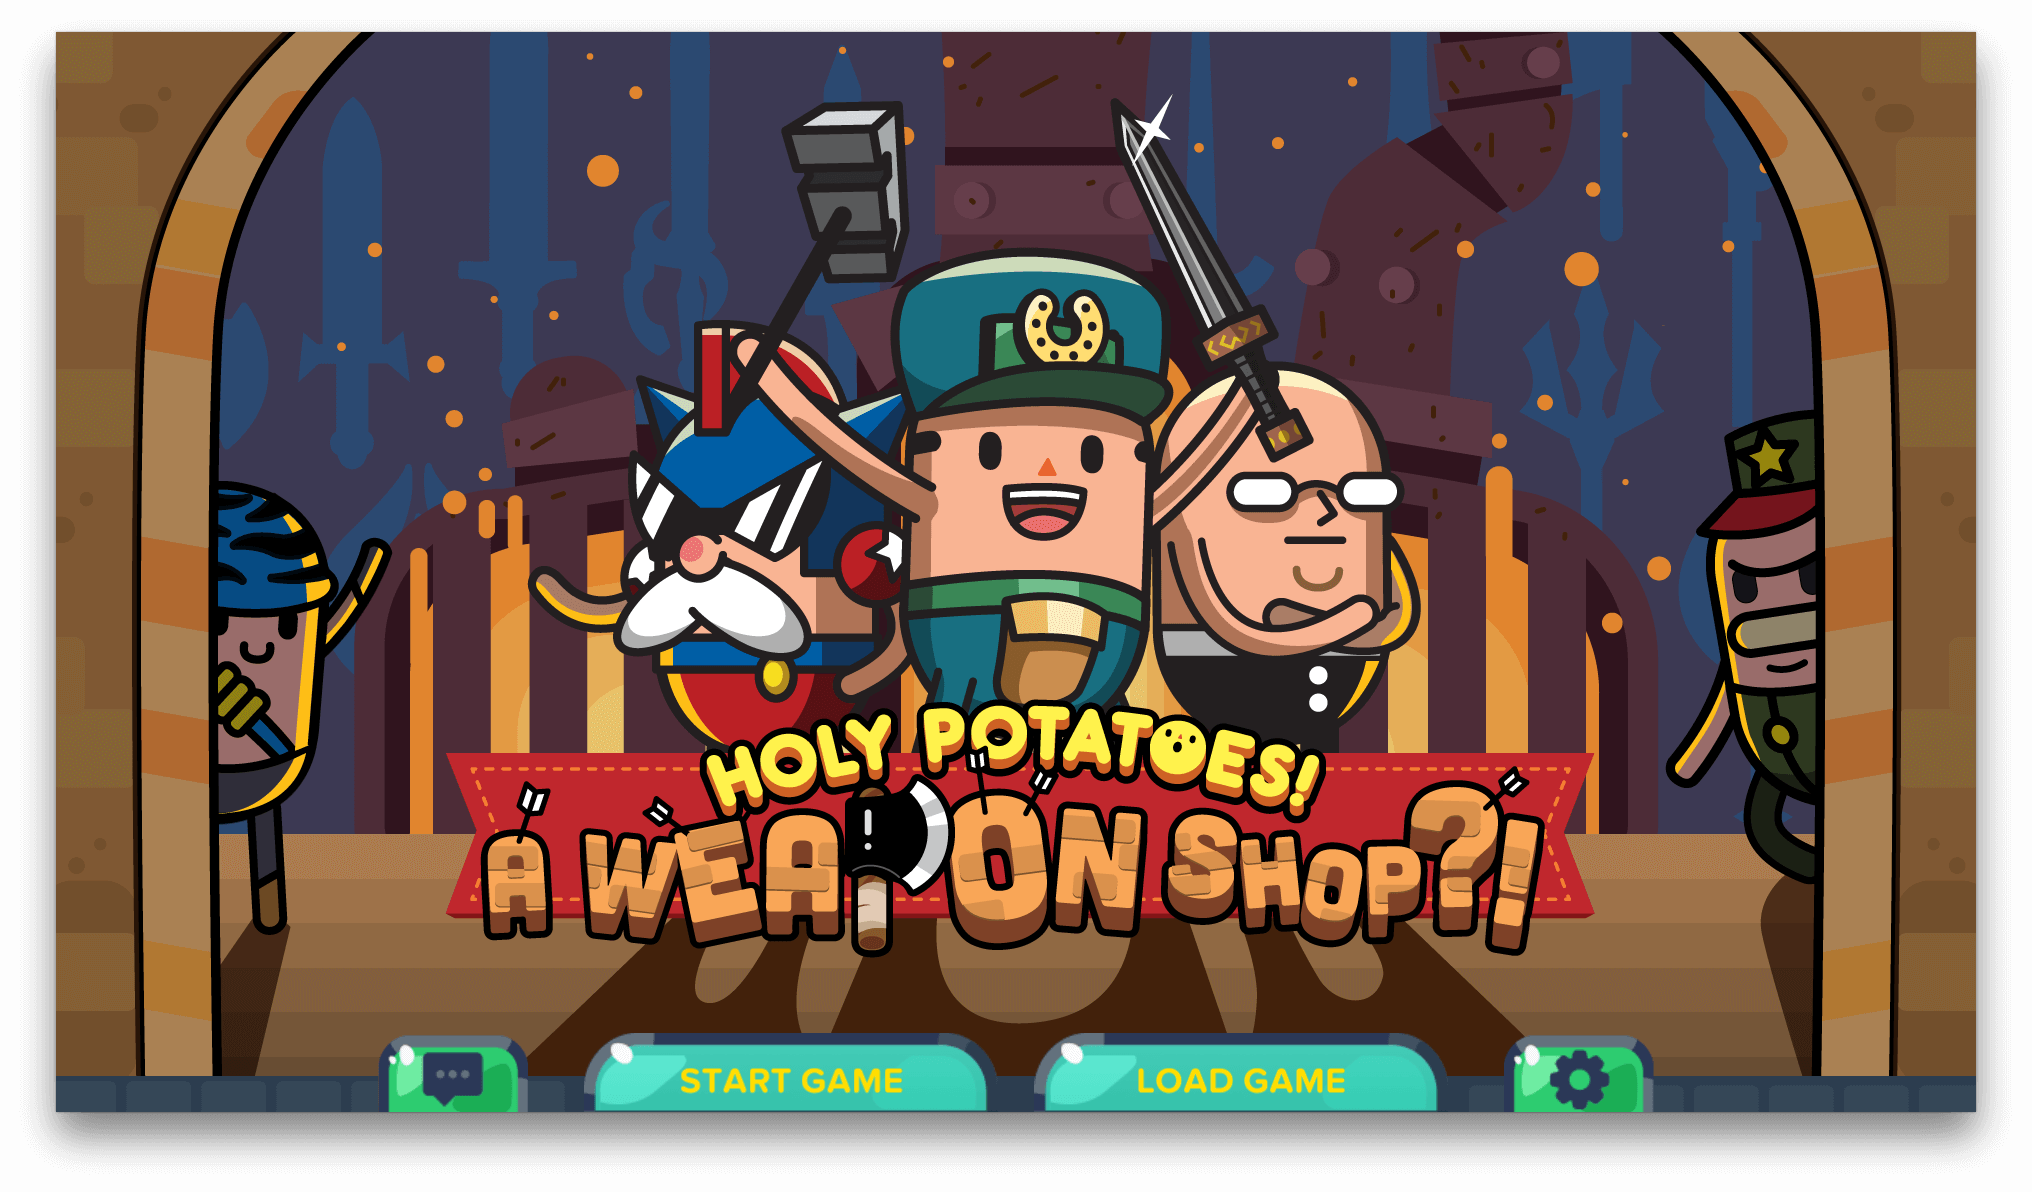 Holy Potatoes! A Weapon Shop?! Review – Pile of Mash or Roasty Goodness?